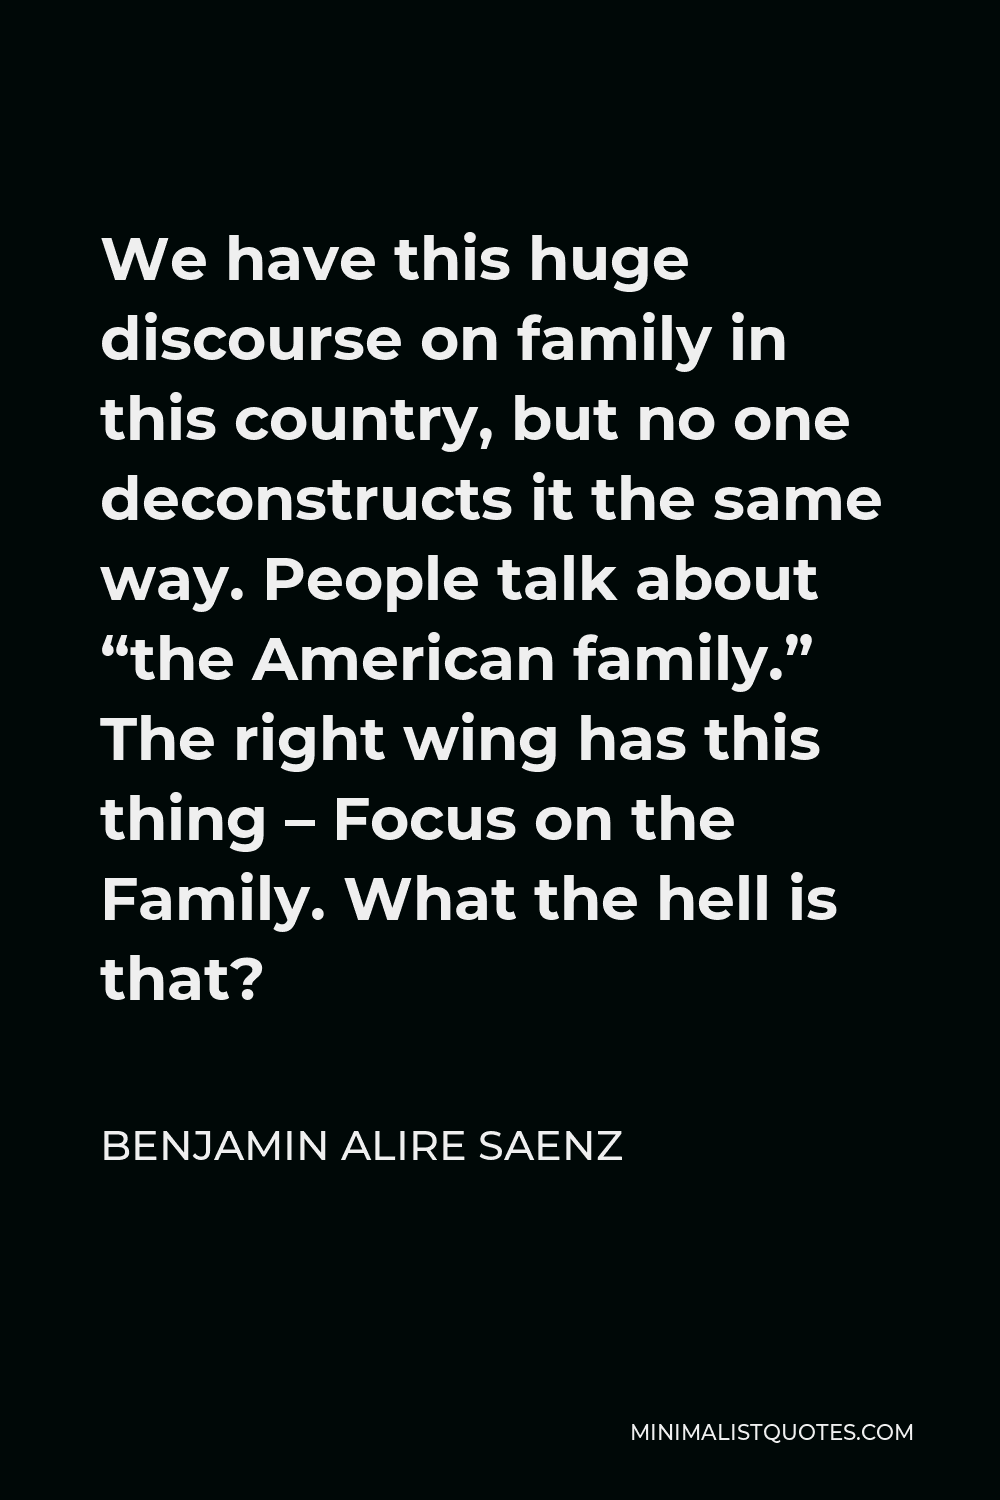 Benjamin Alire Saenz Quote - We have this huge discourse on family in this country, but no one deconstructs it the same way. People talk about “the American family.” The right wing has this thing – Focus on the Family. What the hell is that?